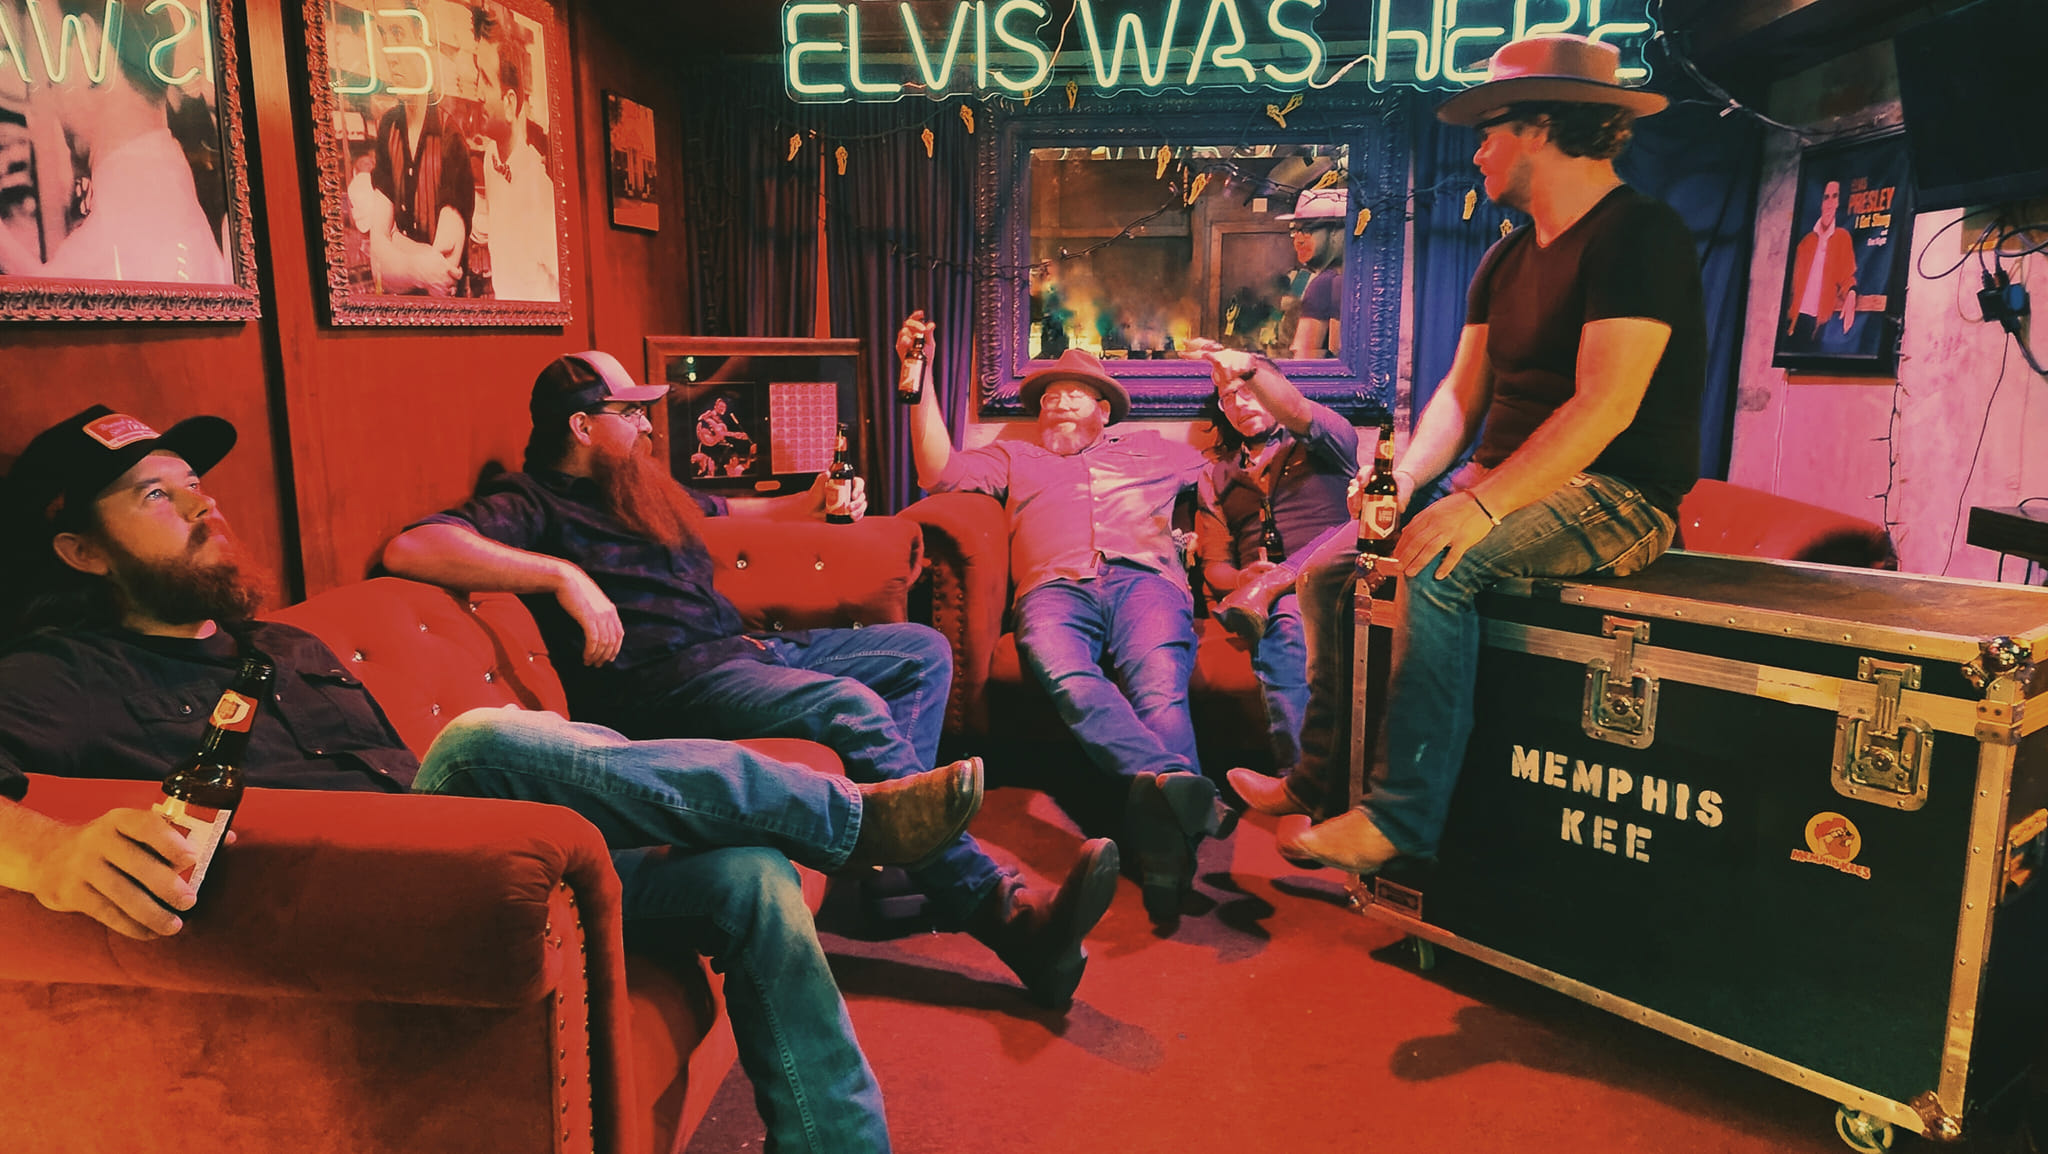 The band hanging out in the Elvis room at Hernandos Hideaway